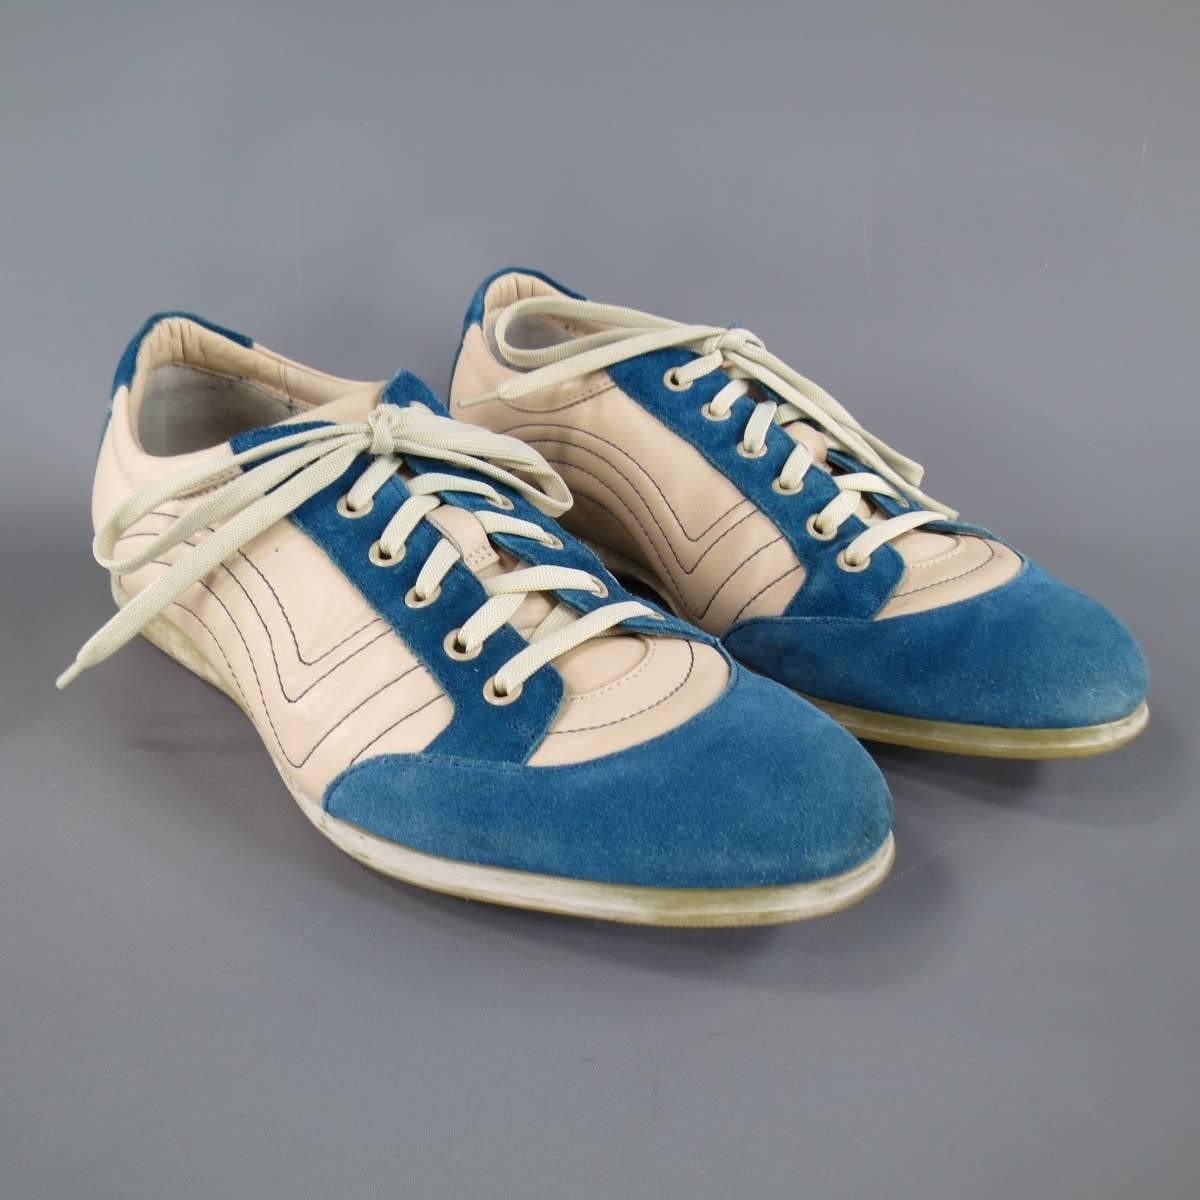 SALVATORE FERRAGAMO Sneakers consists of leather material in a cream and blue color tone. Designed in a round toe, suede trim with contrast stitching along sides. Distress rubber sole. Made in Italy. 

Good Pre-Owned Condition
Marked Size: EE 7
